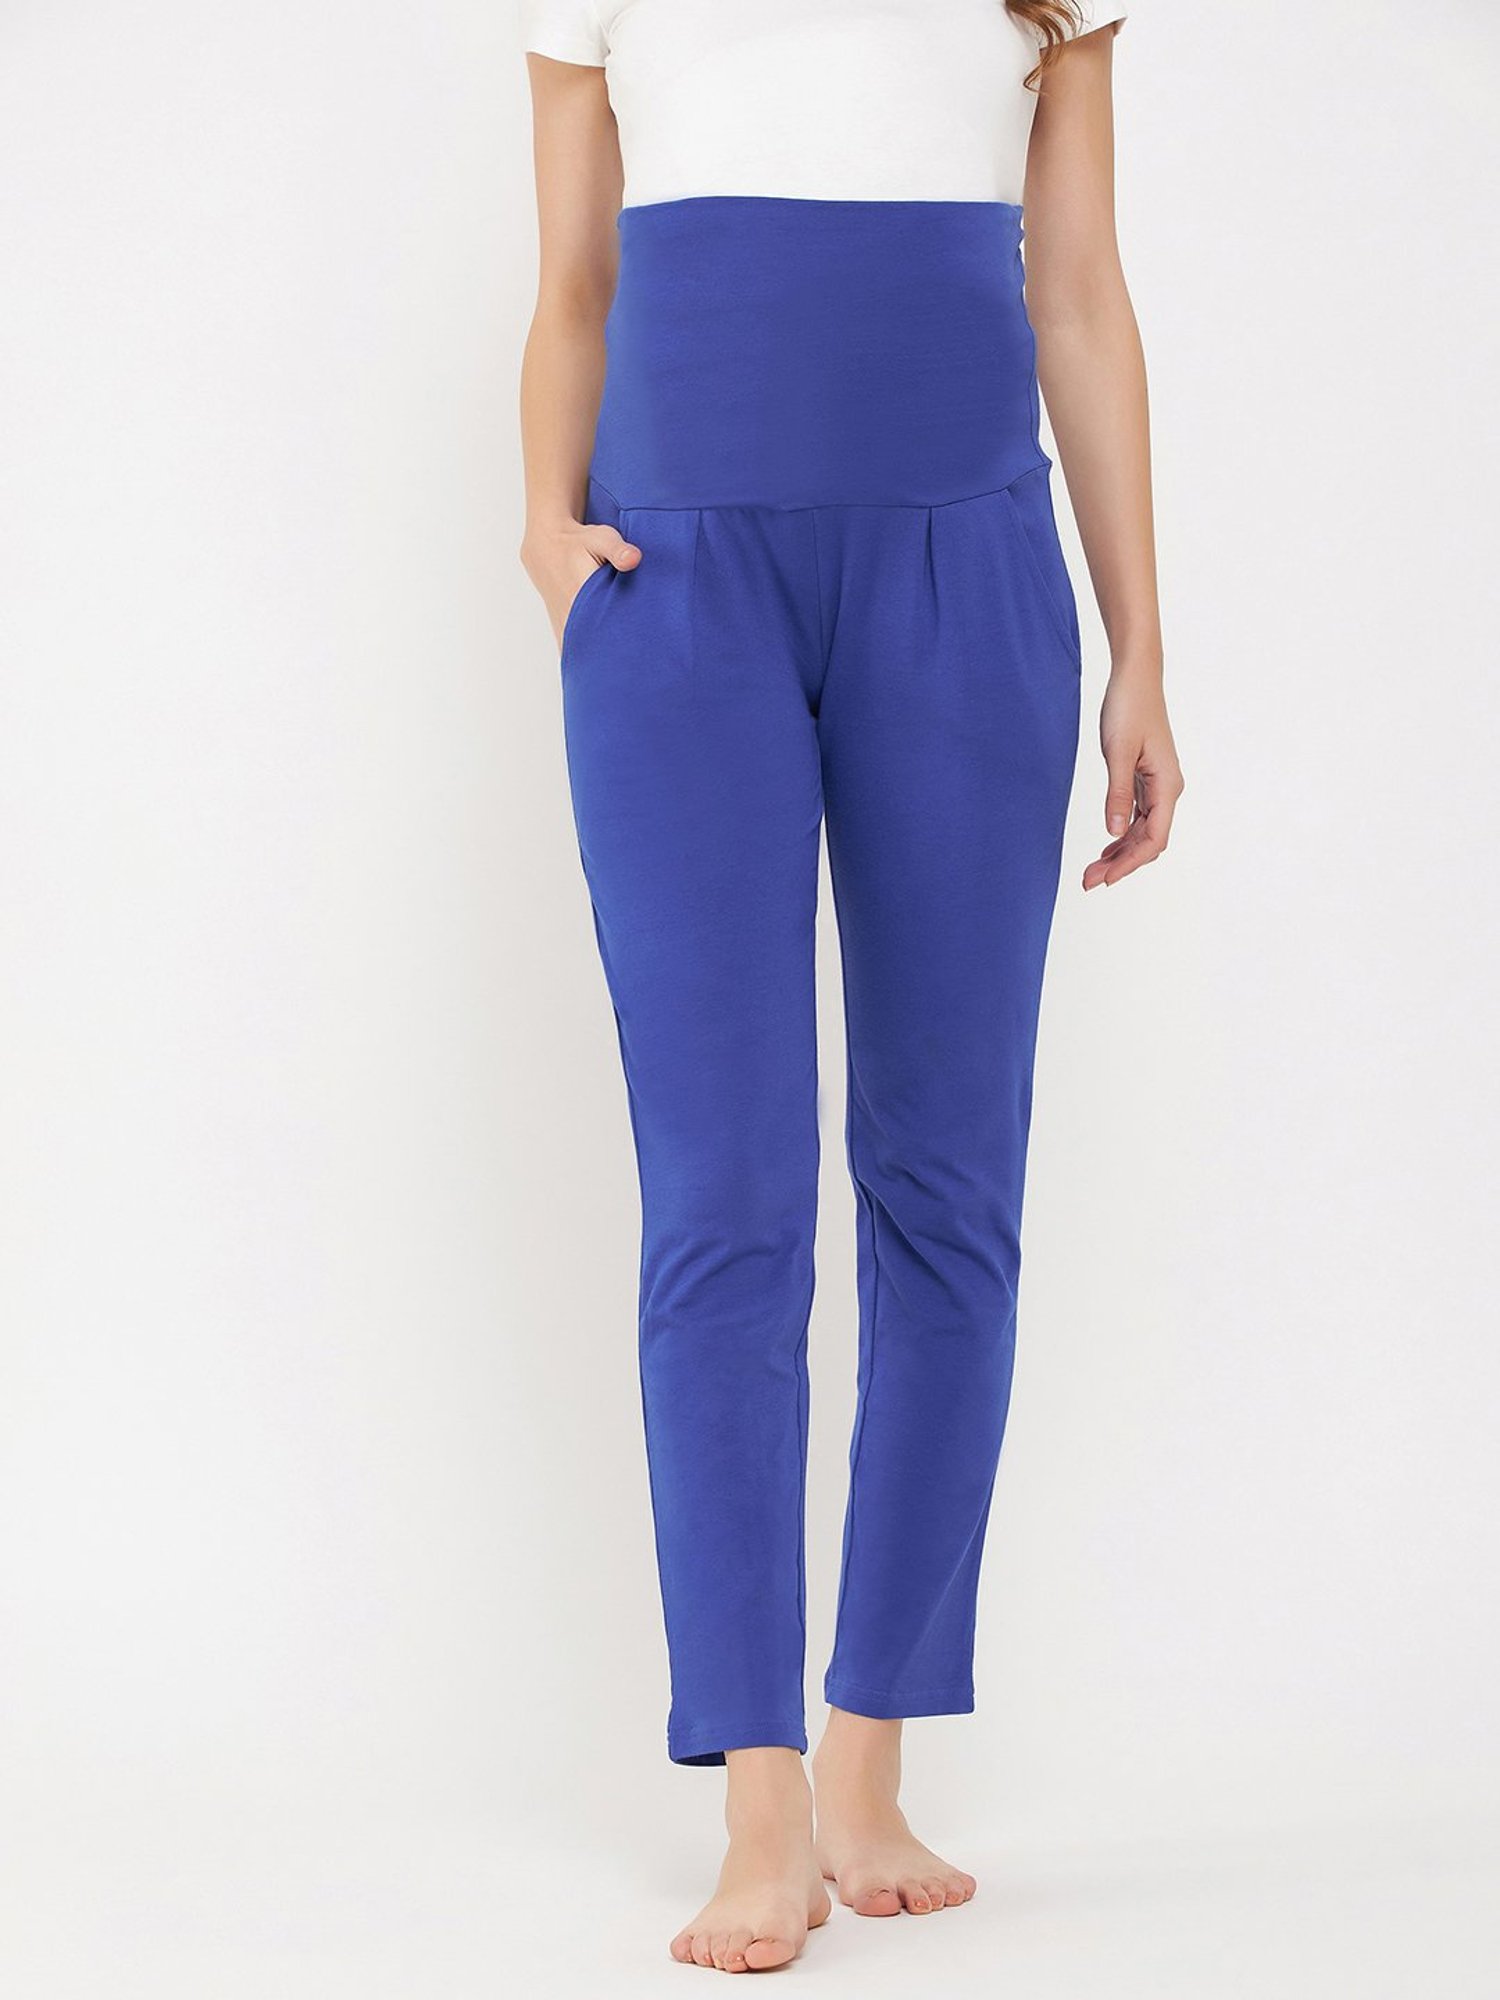 Maternity Casual Pants with Pockets - Navy Blue